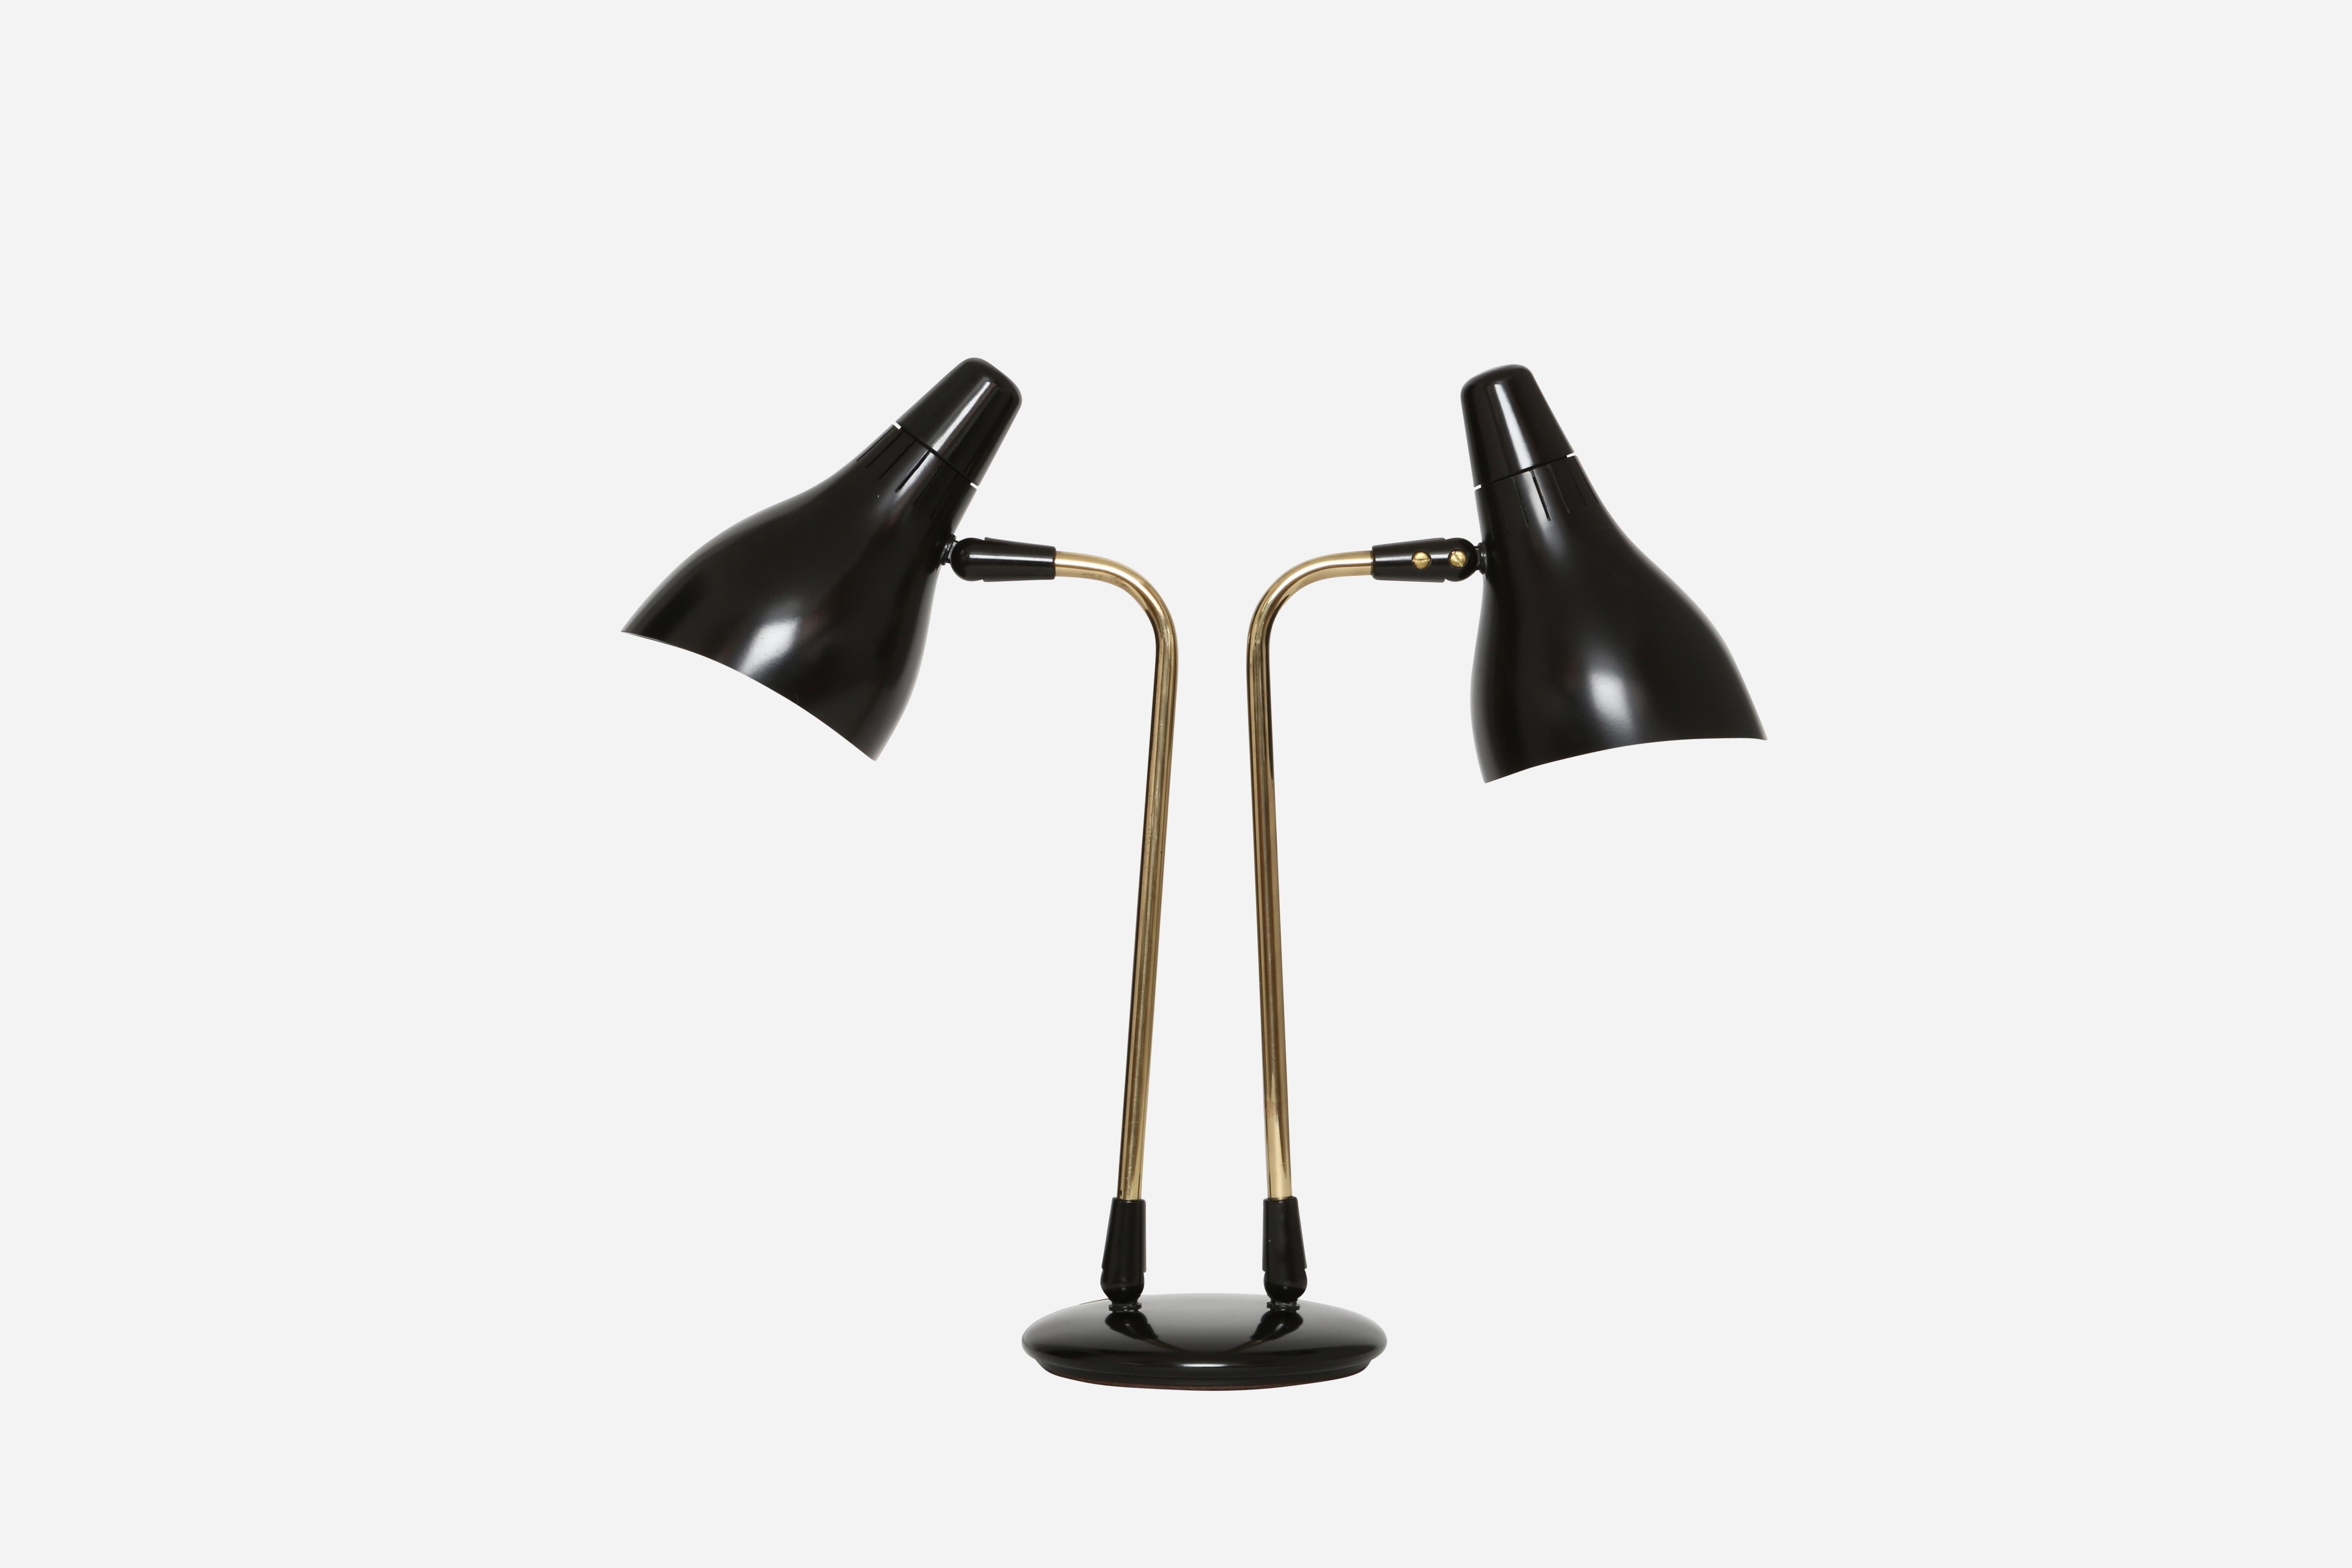 Gerald Thurston desk lamp for Lightolier.
Made in USA in 1950s.
Plastic and brass.